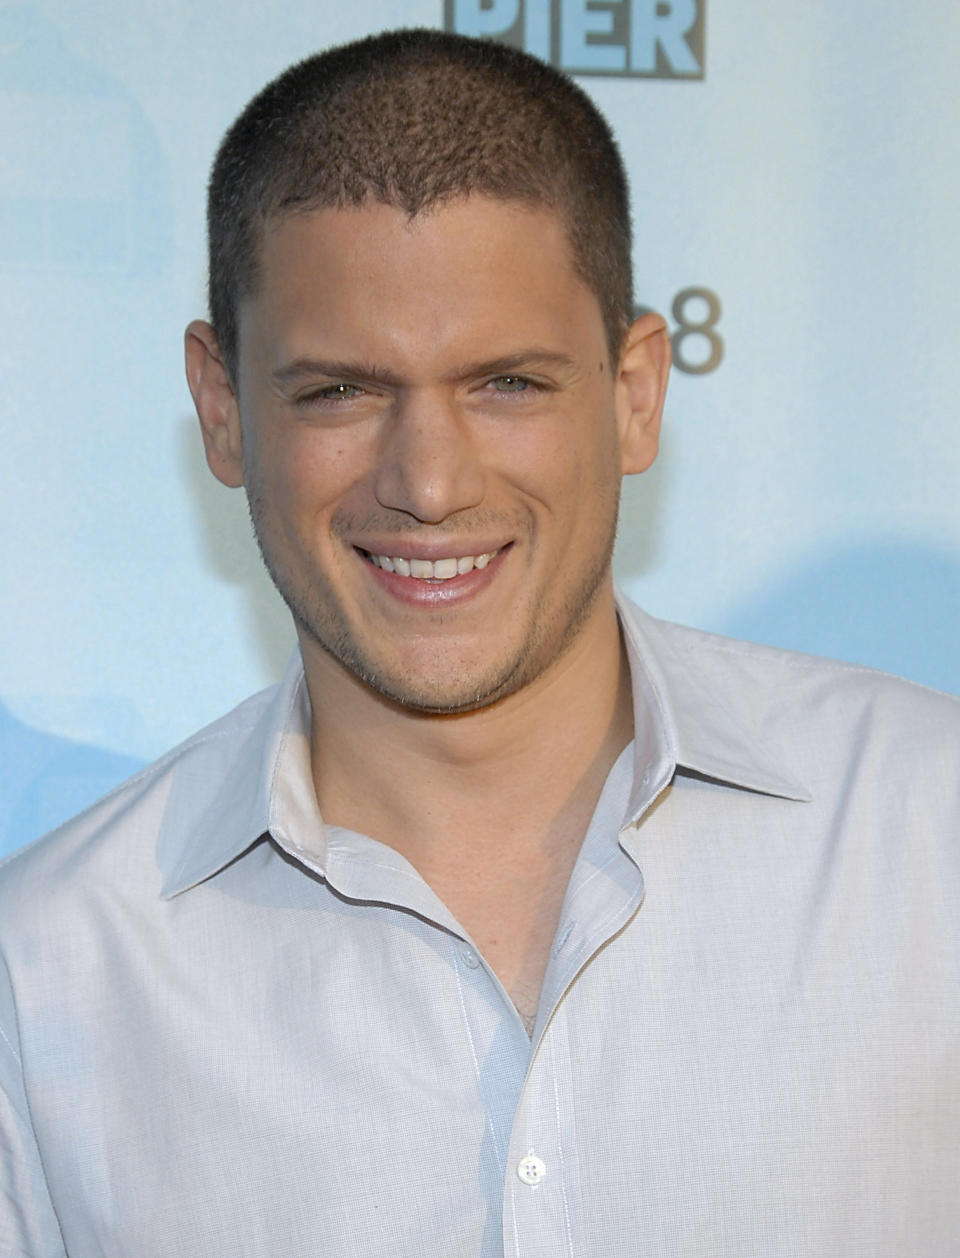 "Prison Break" star Wentworth Miller <a href="http://www.huffingtonpost.com/2013/08/21/wentworth-miller-comes-out-gay_n_3792389.html?utm_hp_ref=gay-voices" target="_blank">came out</a> in August 2013 after being invited to attend the St. Petersburg International Film Festival in Russia. In the midst of massive anti-gay violence and legislation throughout the country at that time, he decided it was time to go public about his sexuality.  "Thank you for your kind invitation. As someone who has enjoyed visiting Russia in the past and can also claim a degree of Russian ancestry, it would make me happy to say yes," the 41-year-old wrote in a letter to the festival's director, which was posted on GLAAD's website. "However, as a gay man, I must decline."